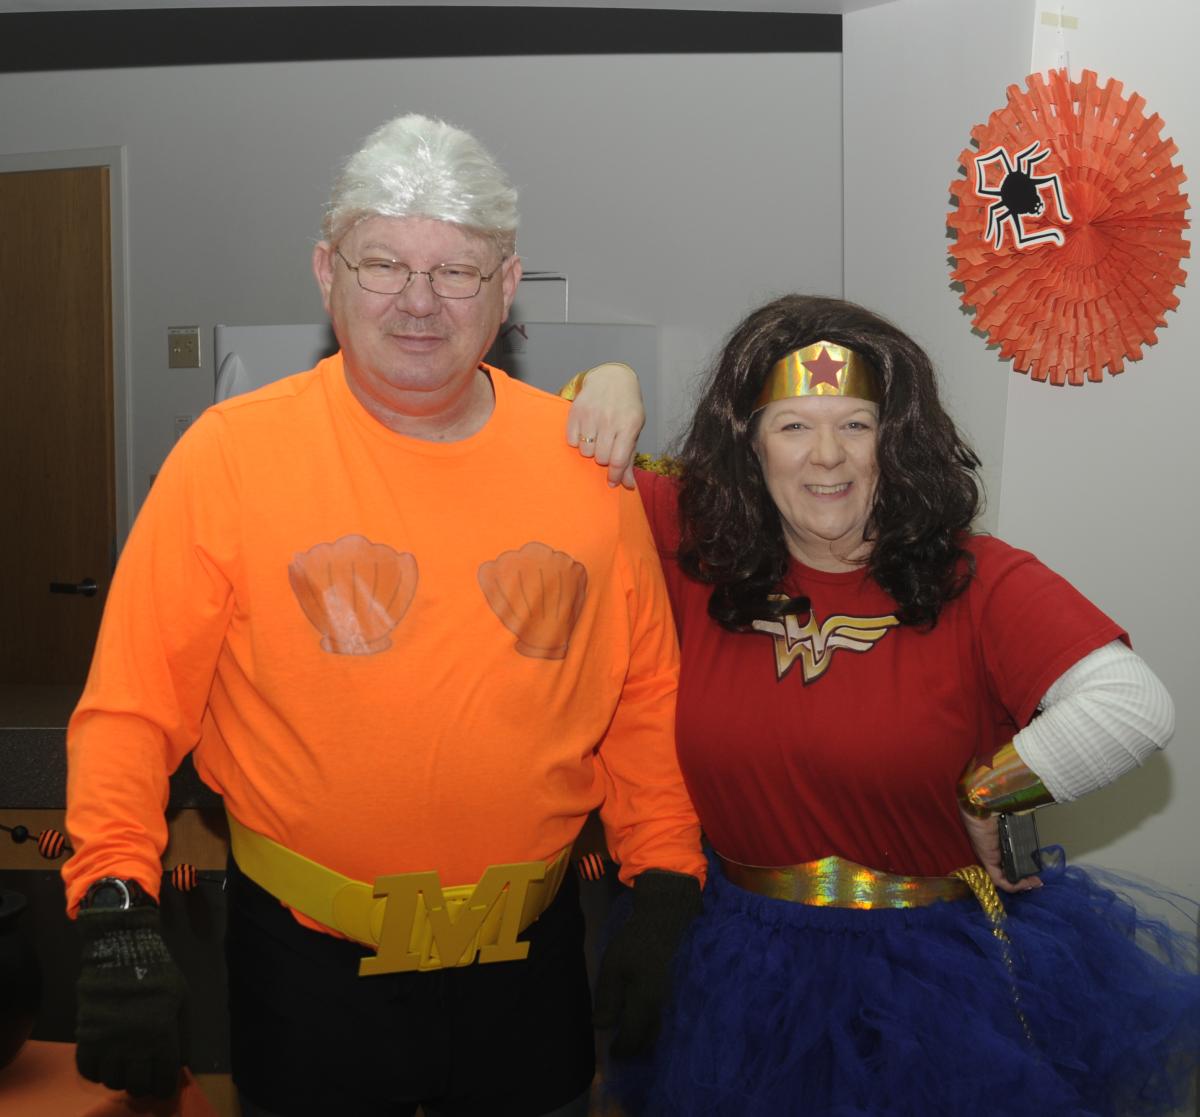 Mermaid Man (of "SpongeBob SquarePants" fame) and Wonder Woman – Chet Beaver, assistant director of student advocacy for veterans/military, and Christie A. Bing Kracker, director of the Center for Academic Excellence – team up in the first-floor lobby, delighting the children through their commitment to character. 